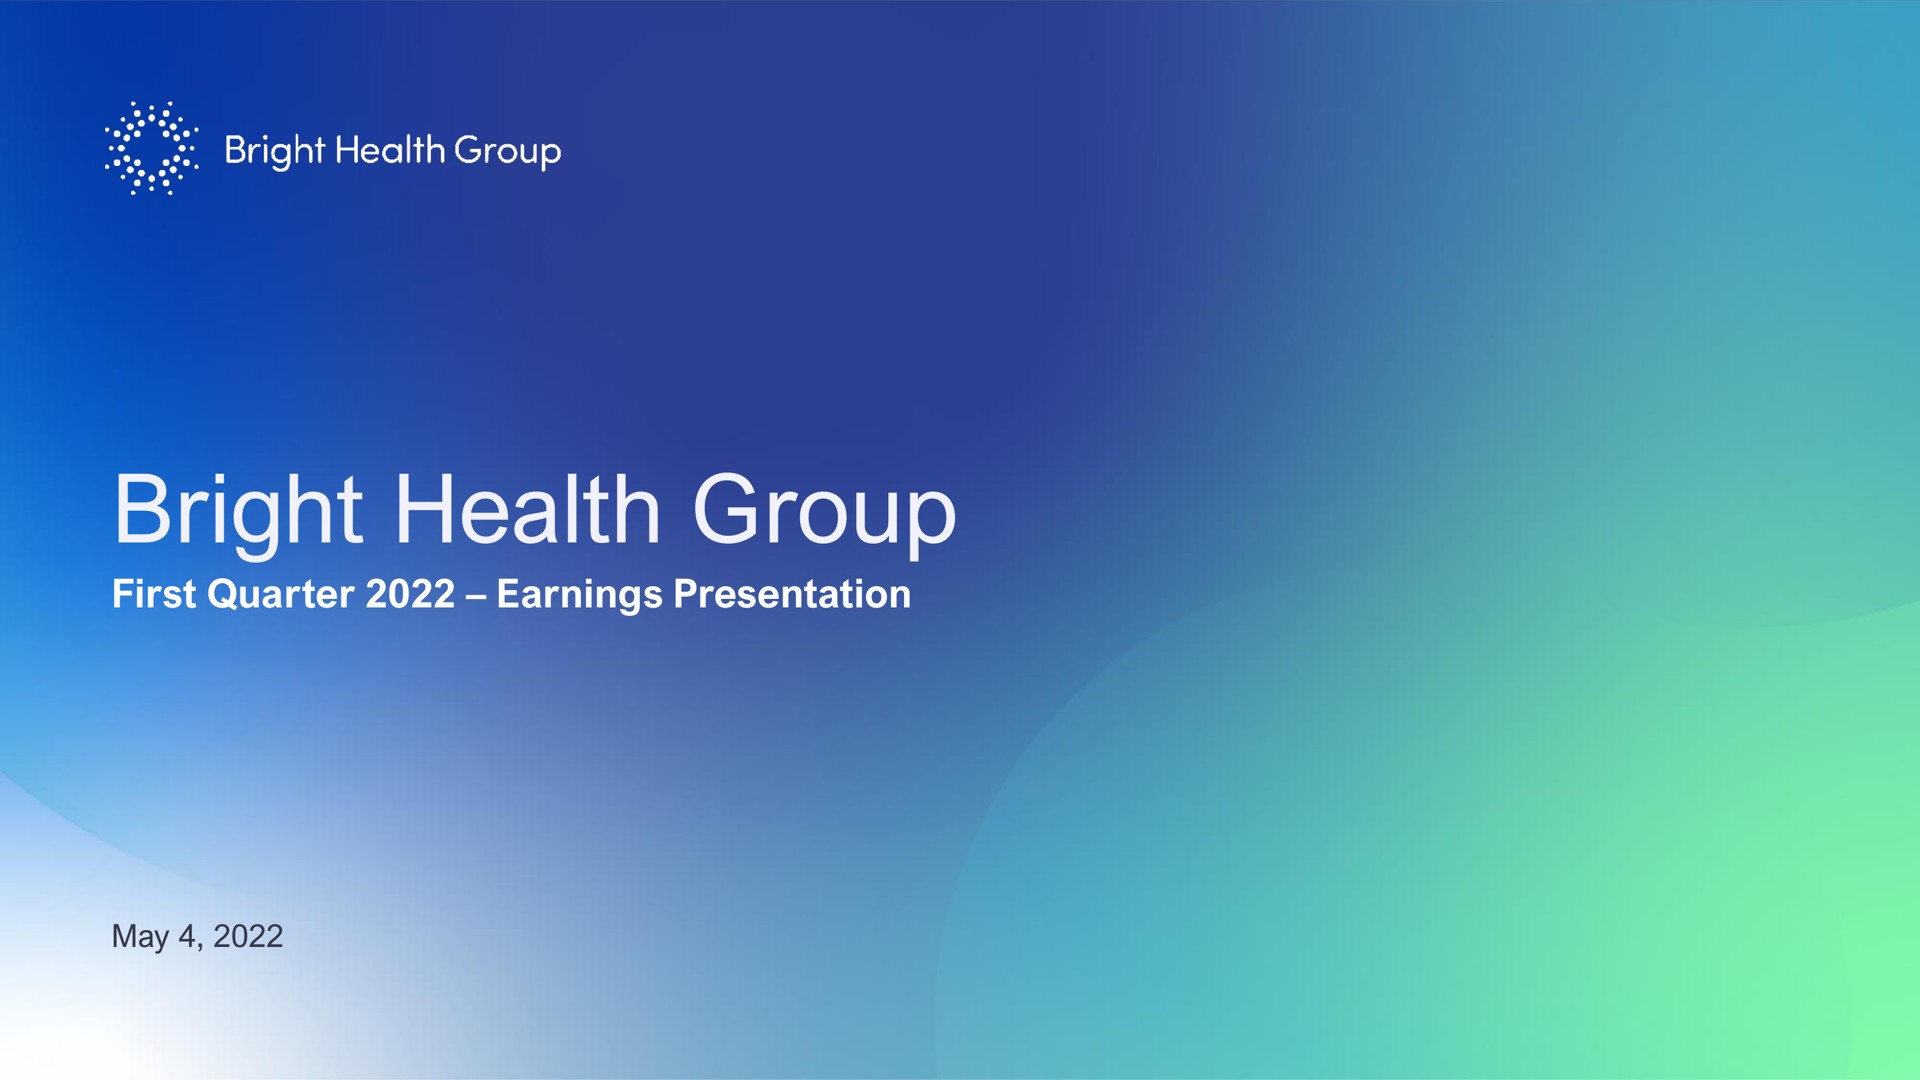 bright health group first quarter earnings presentation may | Bright Health Group